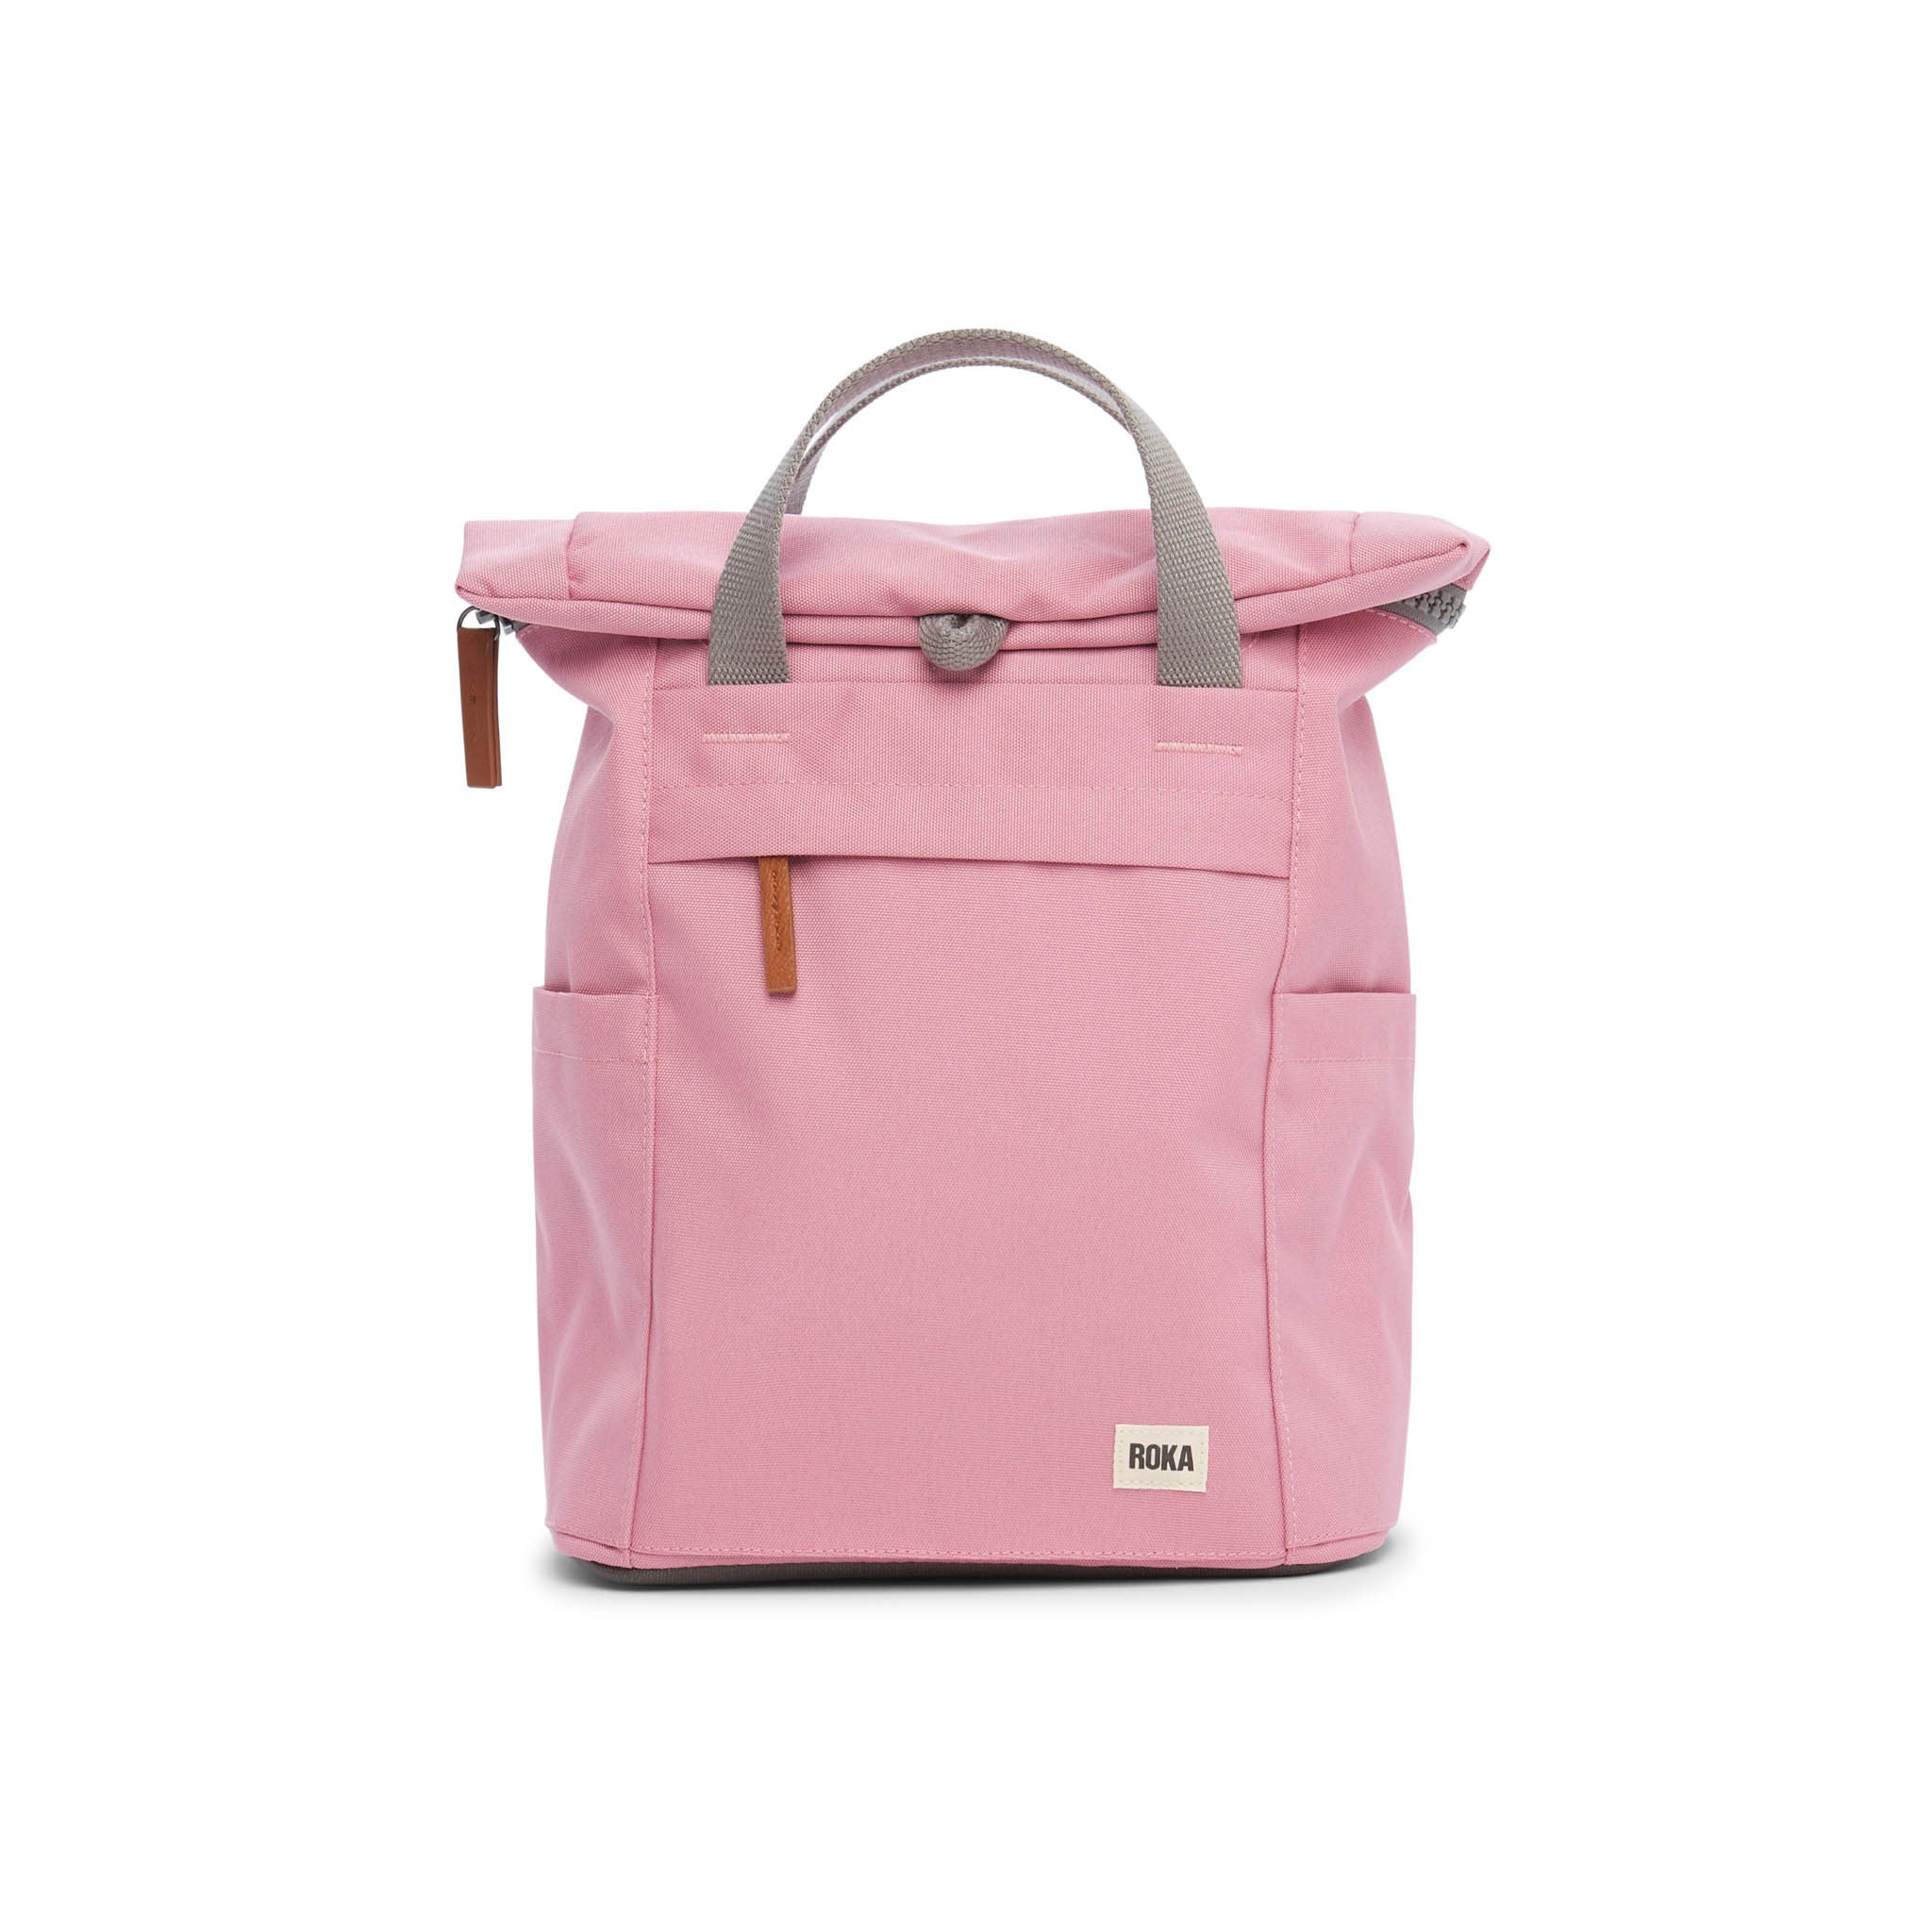 ROKA London Finchely A Antique Pink (Small)